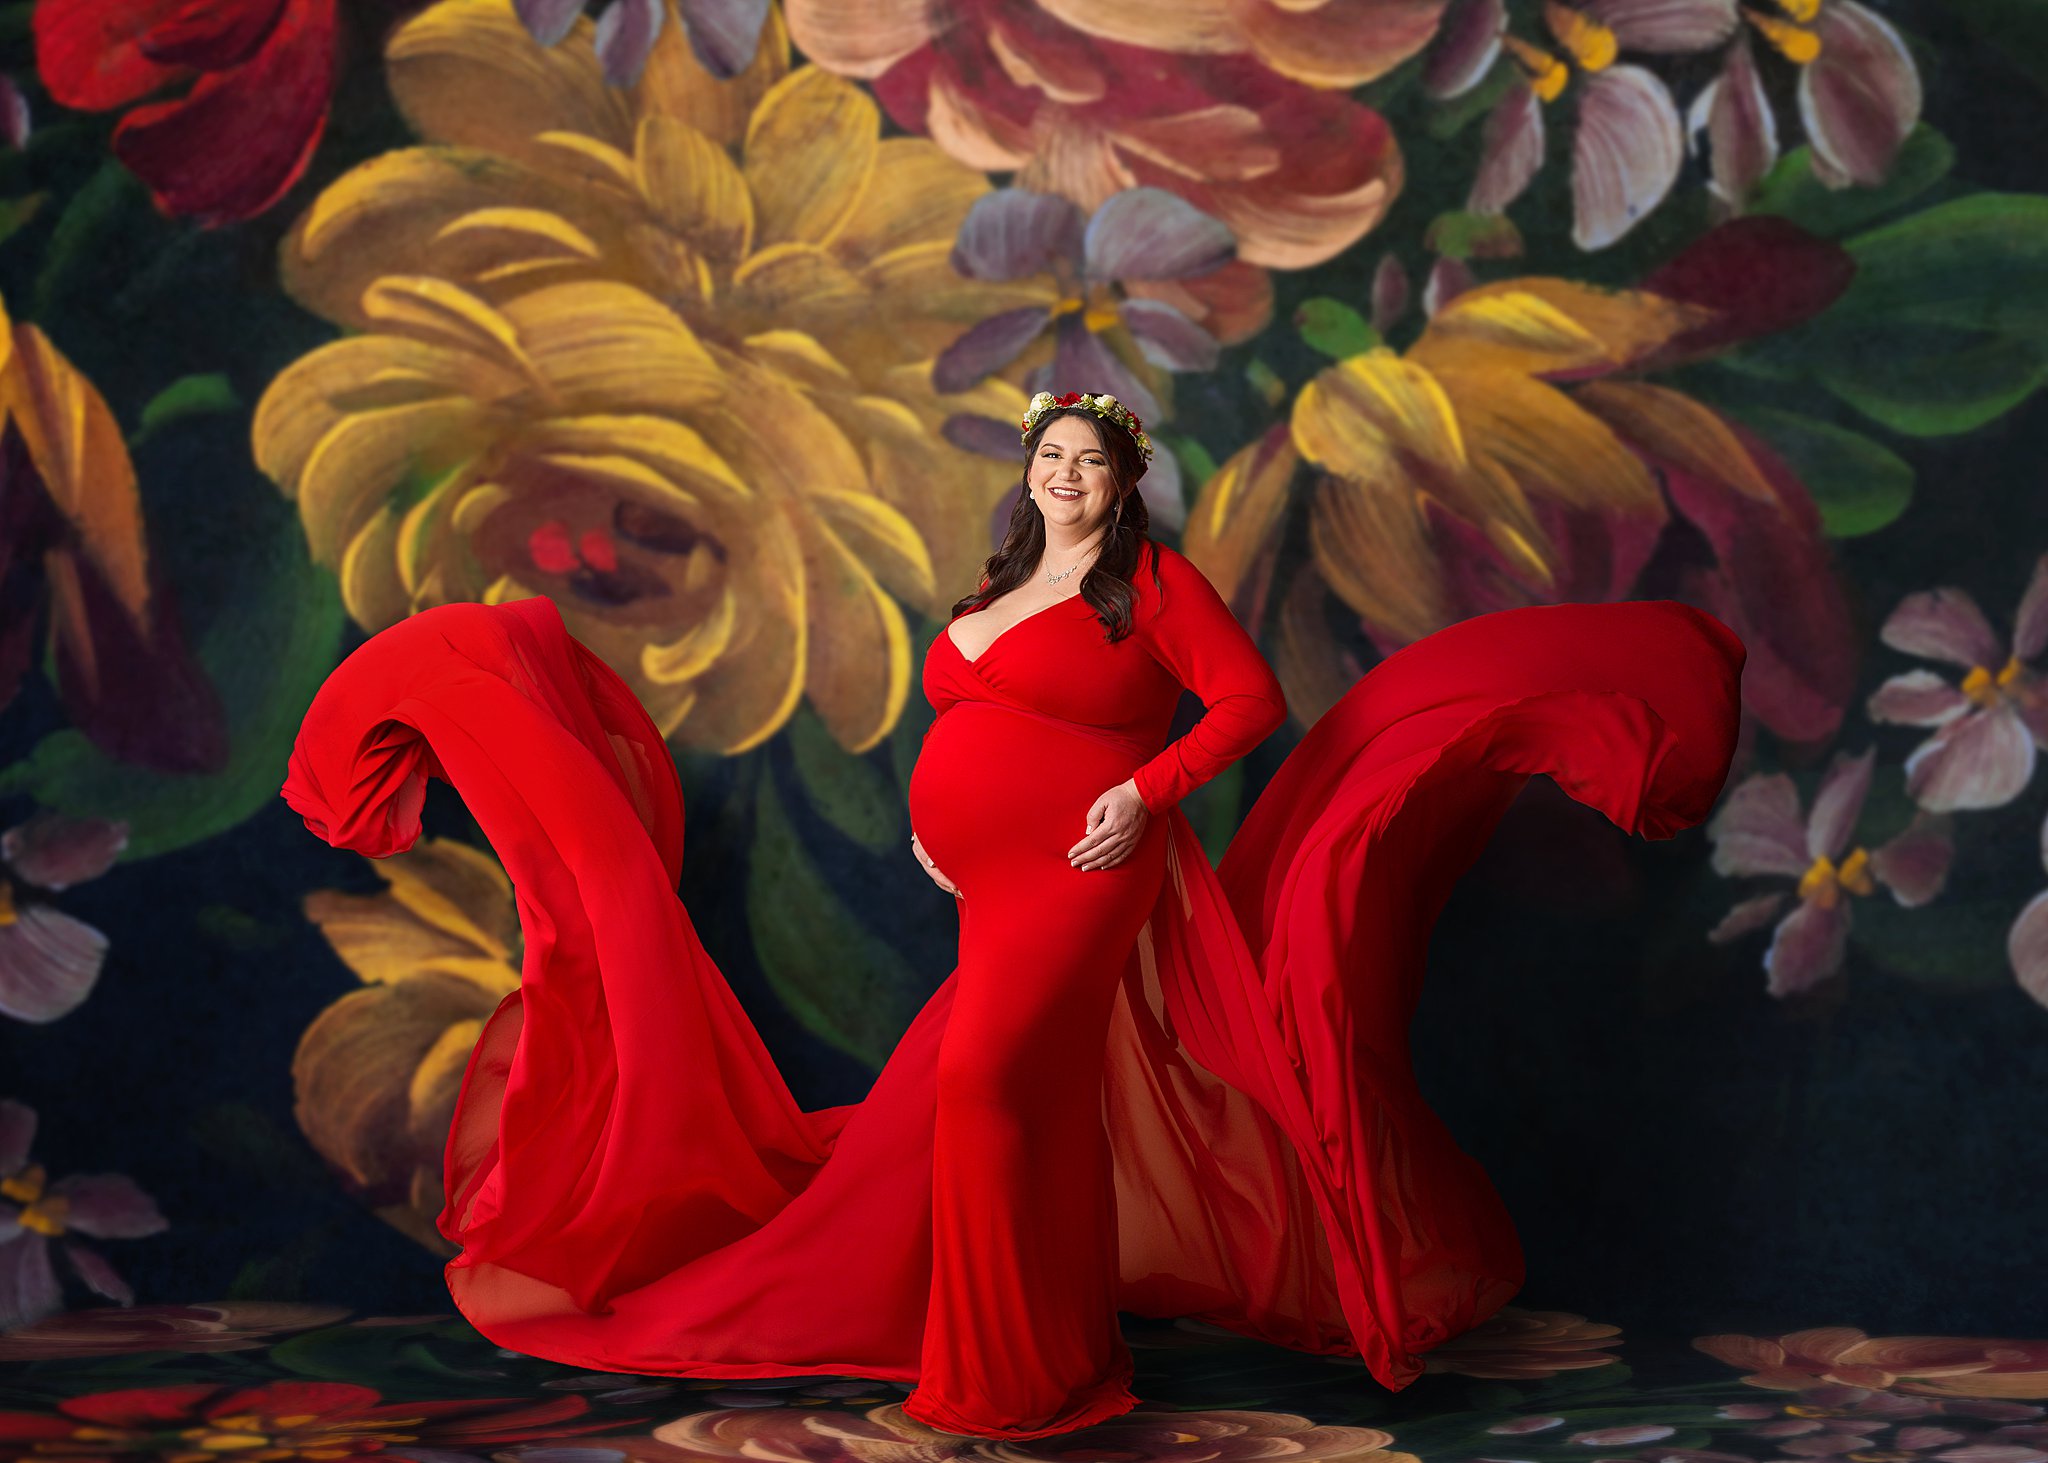 Pregnant woman posing on a floral backdrop in a red flowy gown from Moline Illinois.